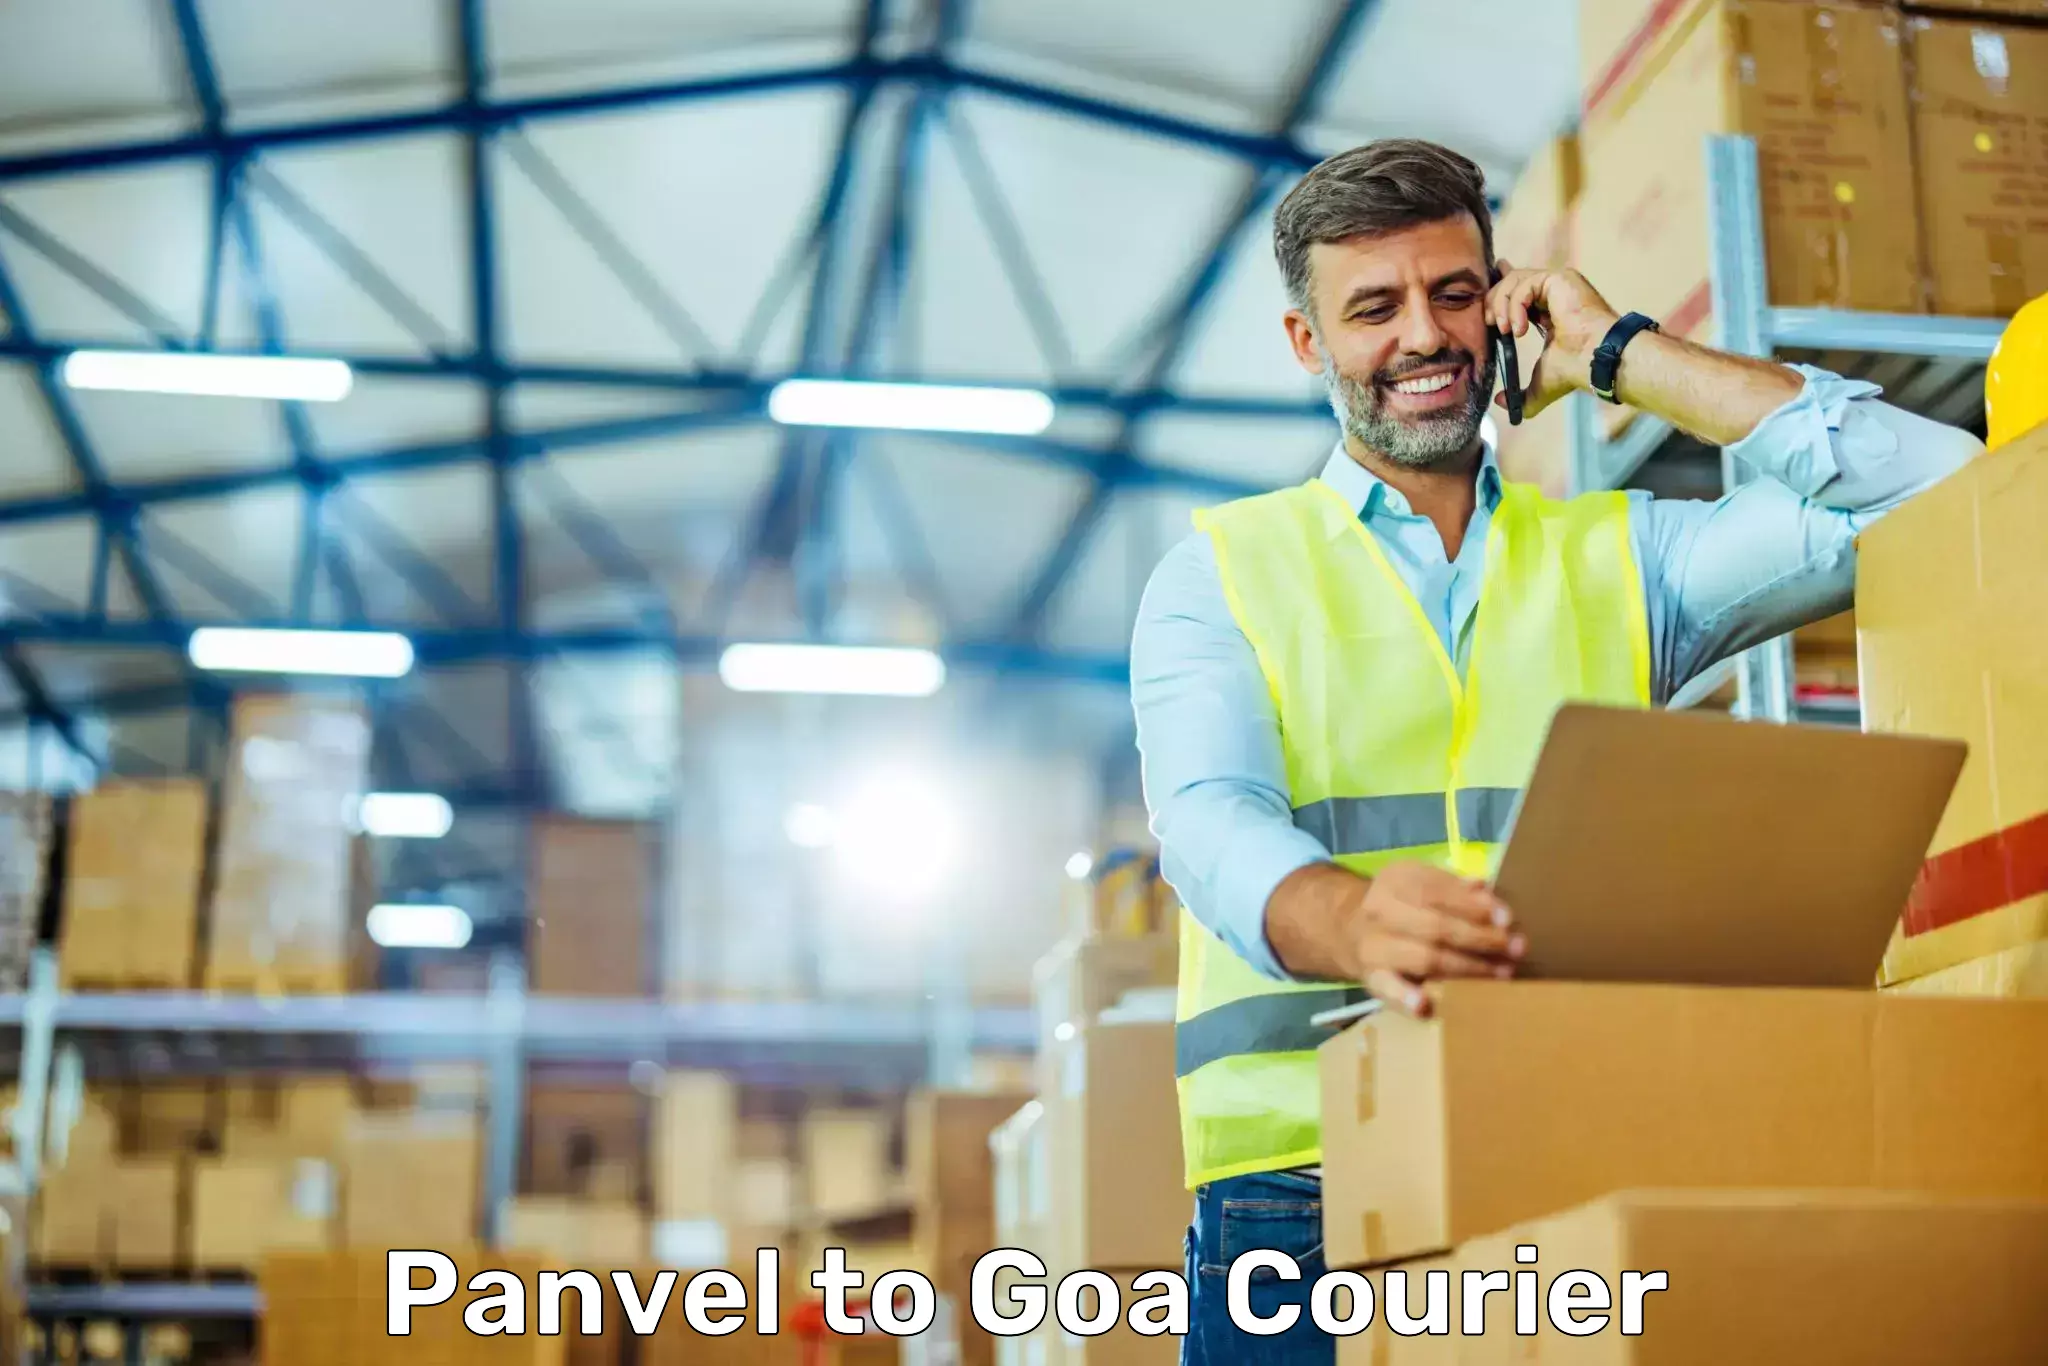 Speedy delivery service Panvel to South Goa